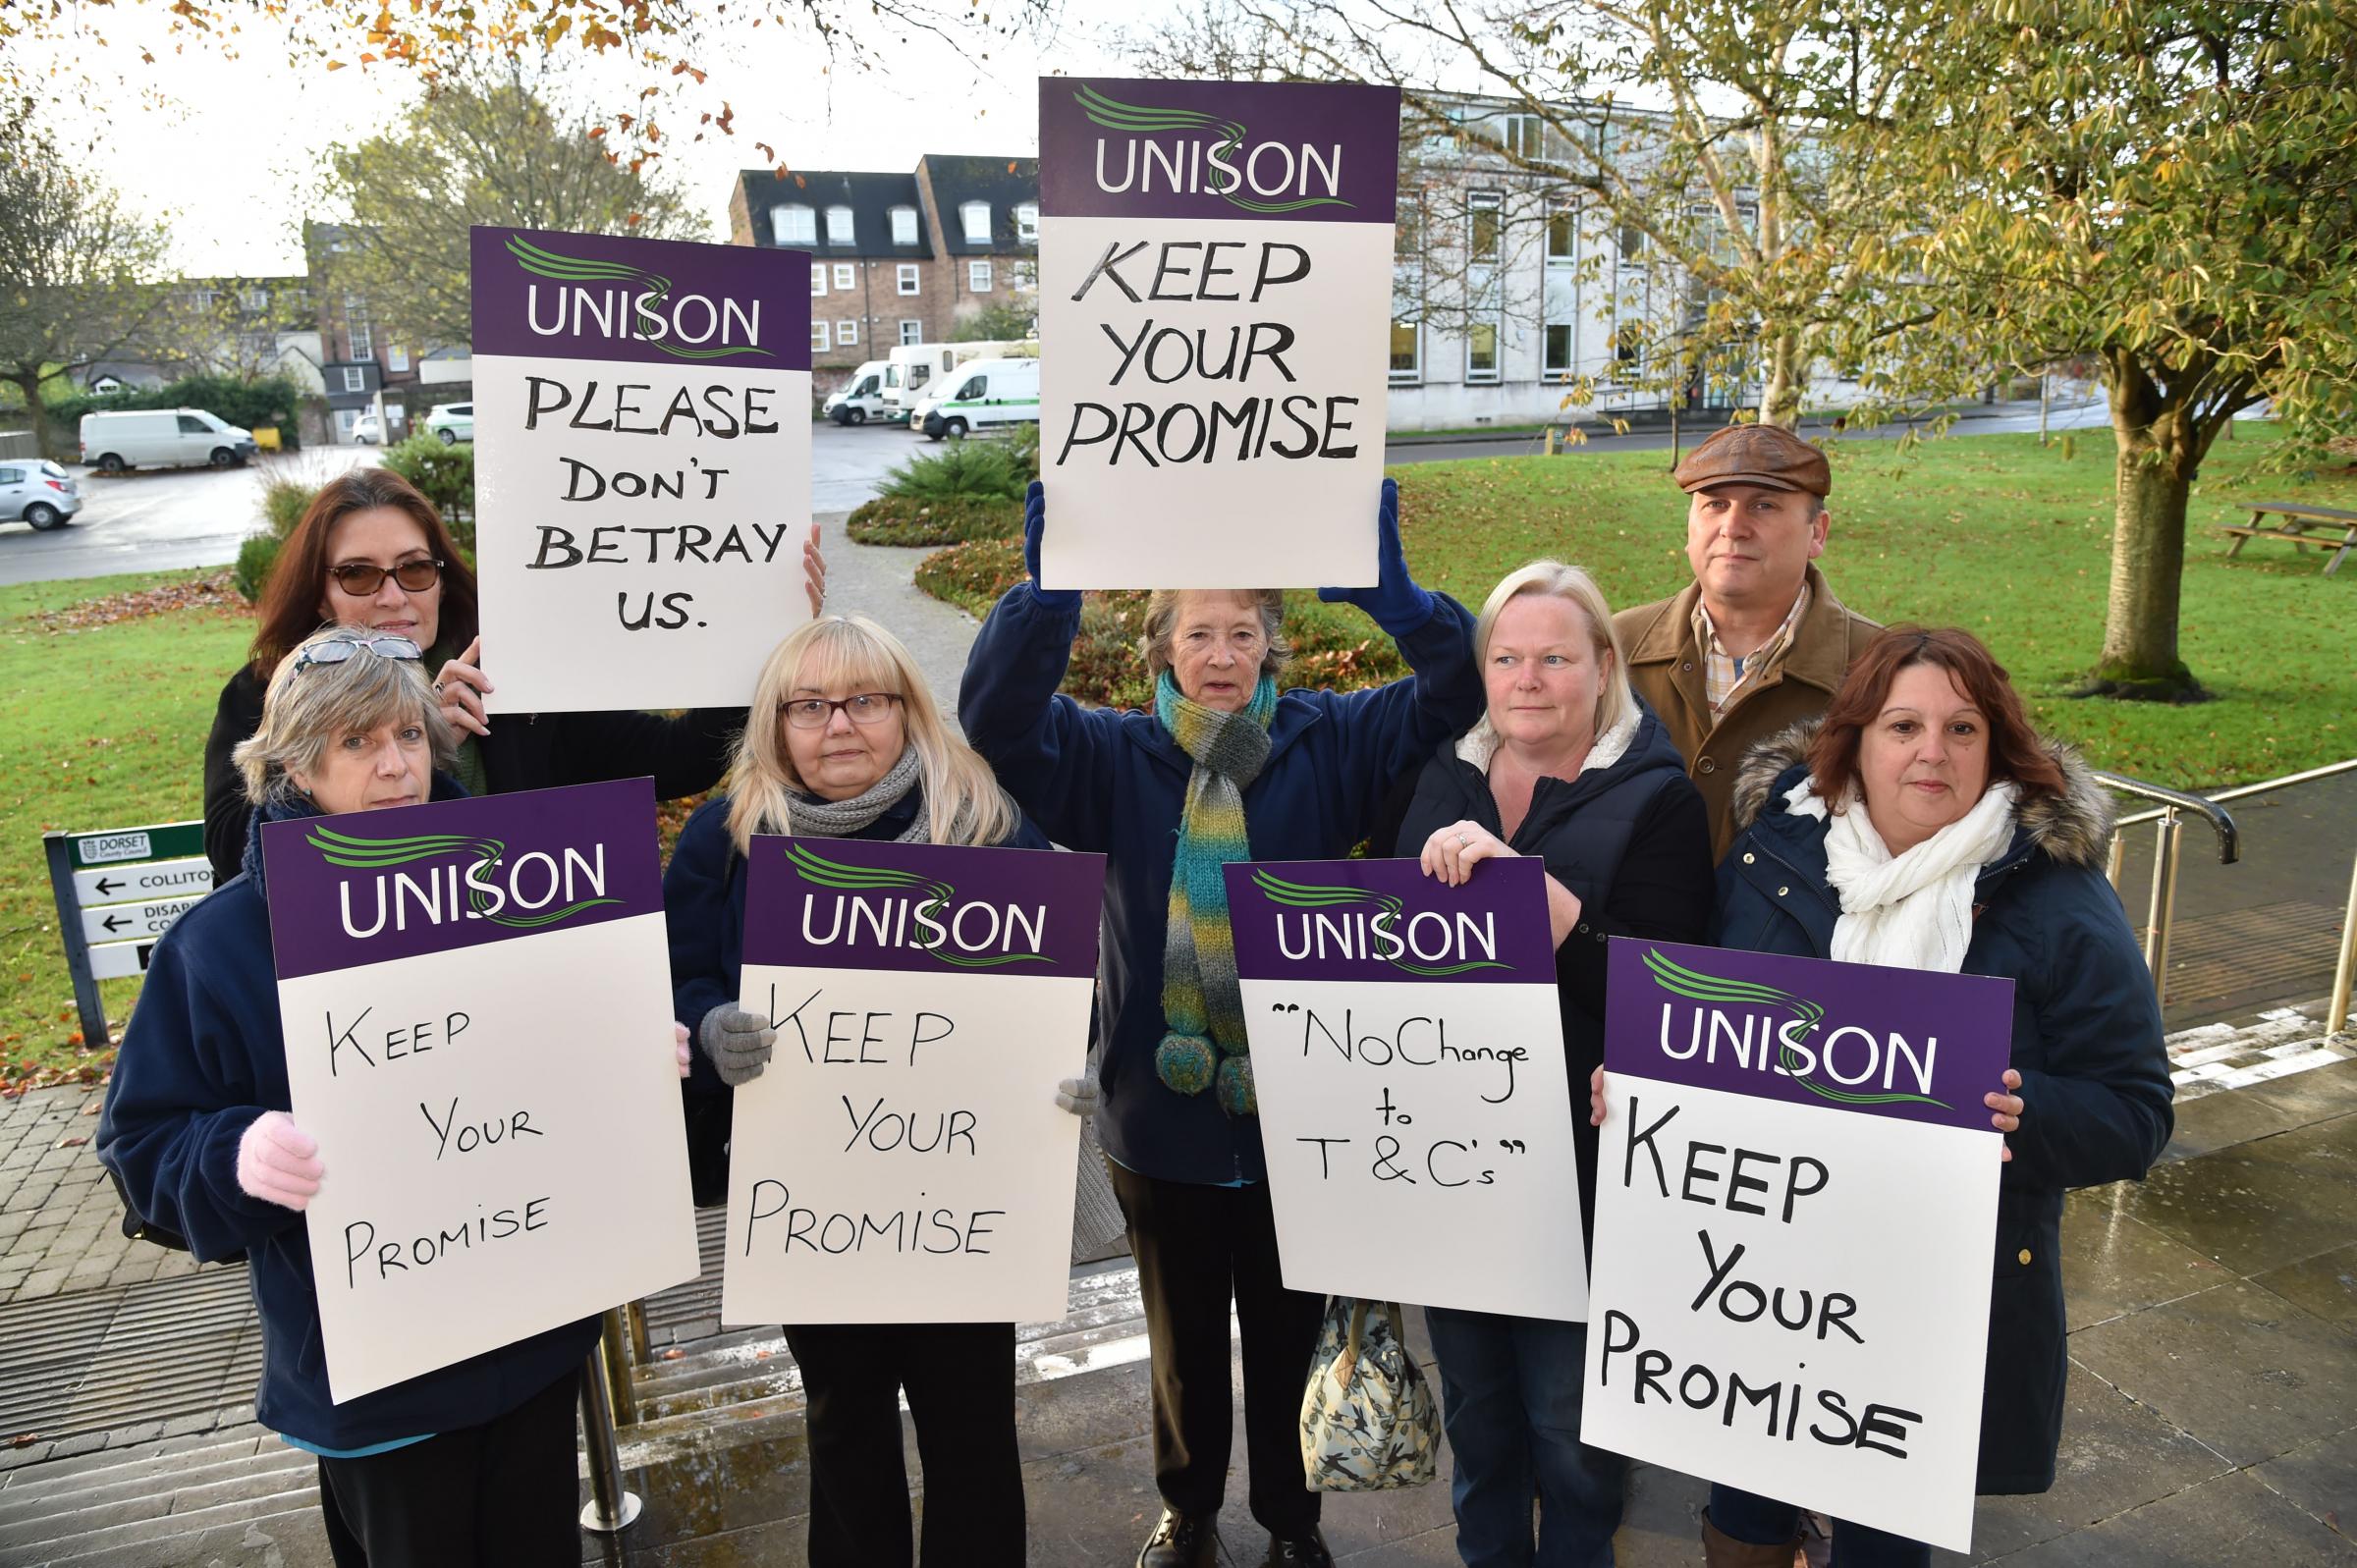 Image result for Care workers sacked because they won't agree to pay cut in council company's 'Project Fear', union claims